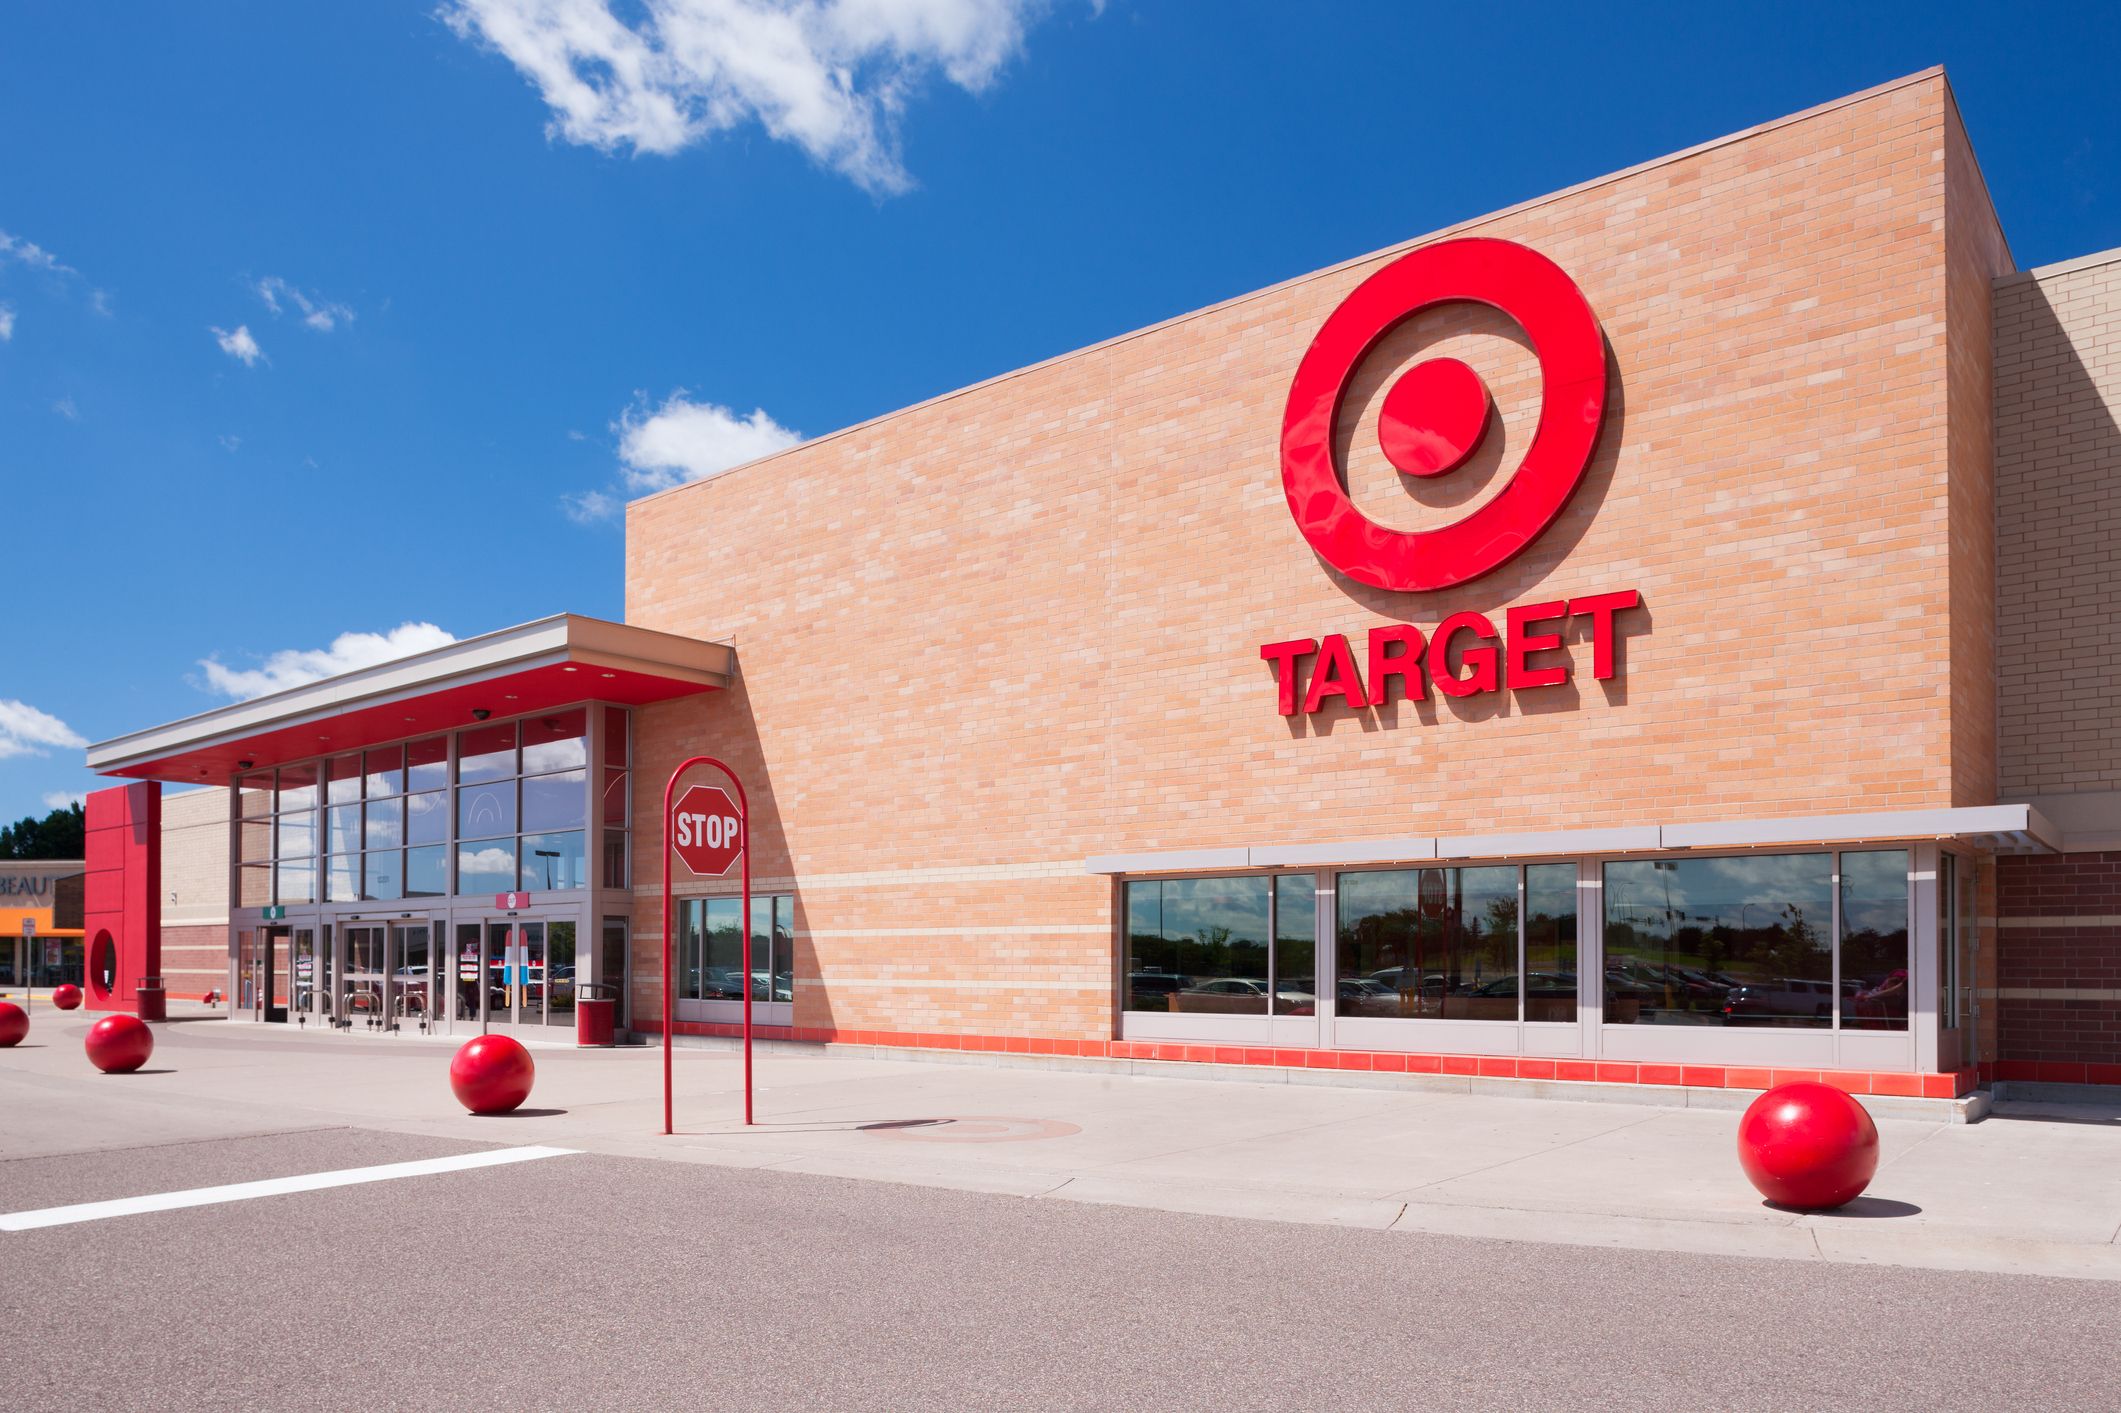 Is target open on easter sunday